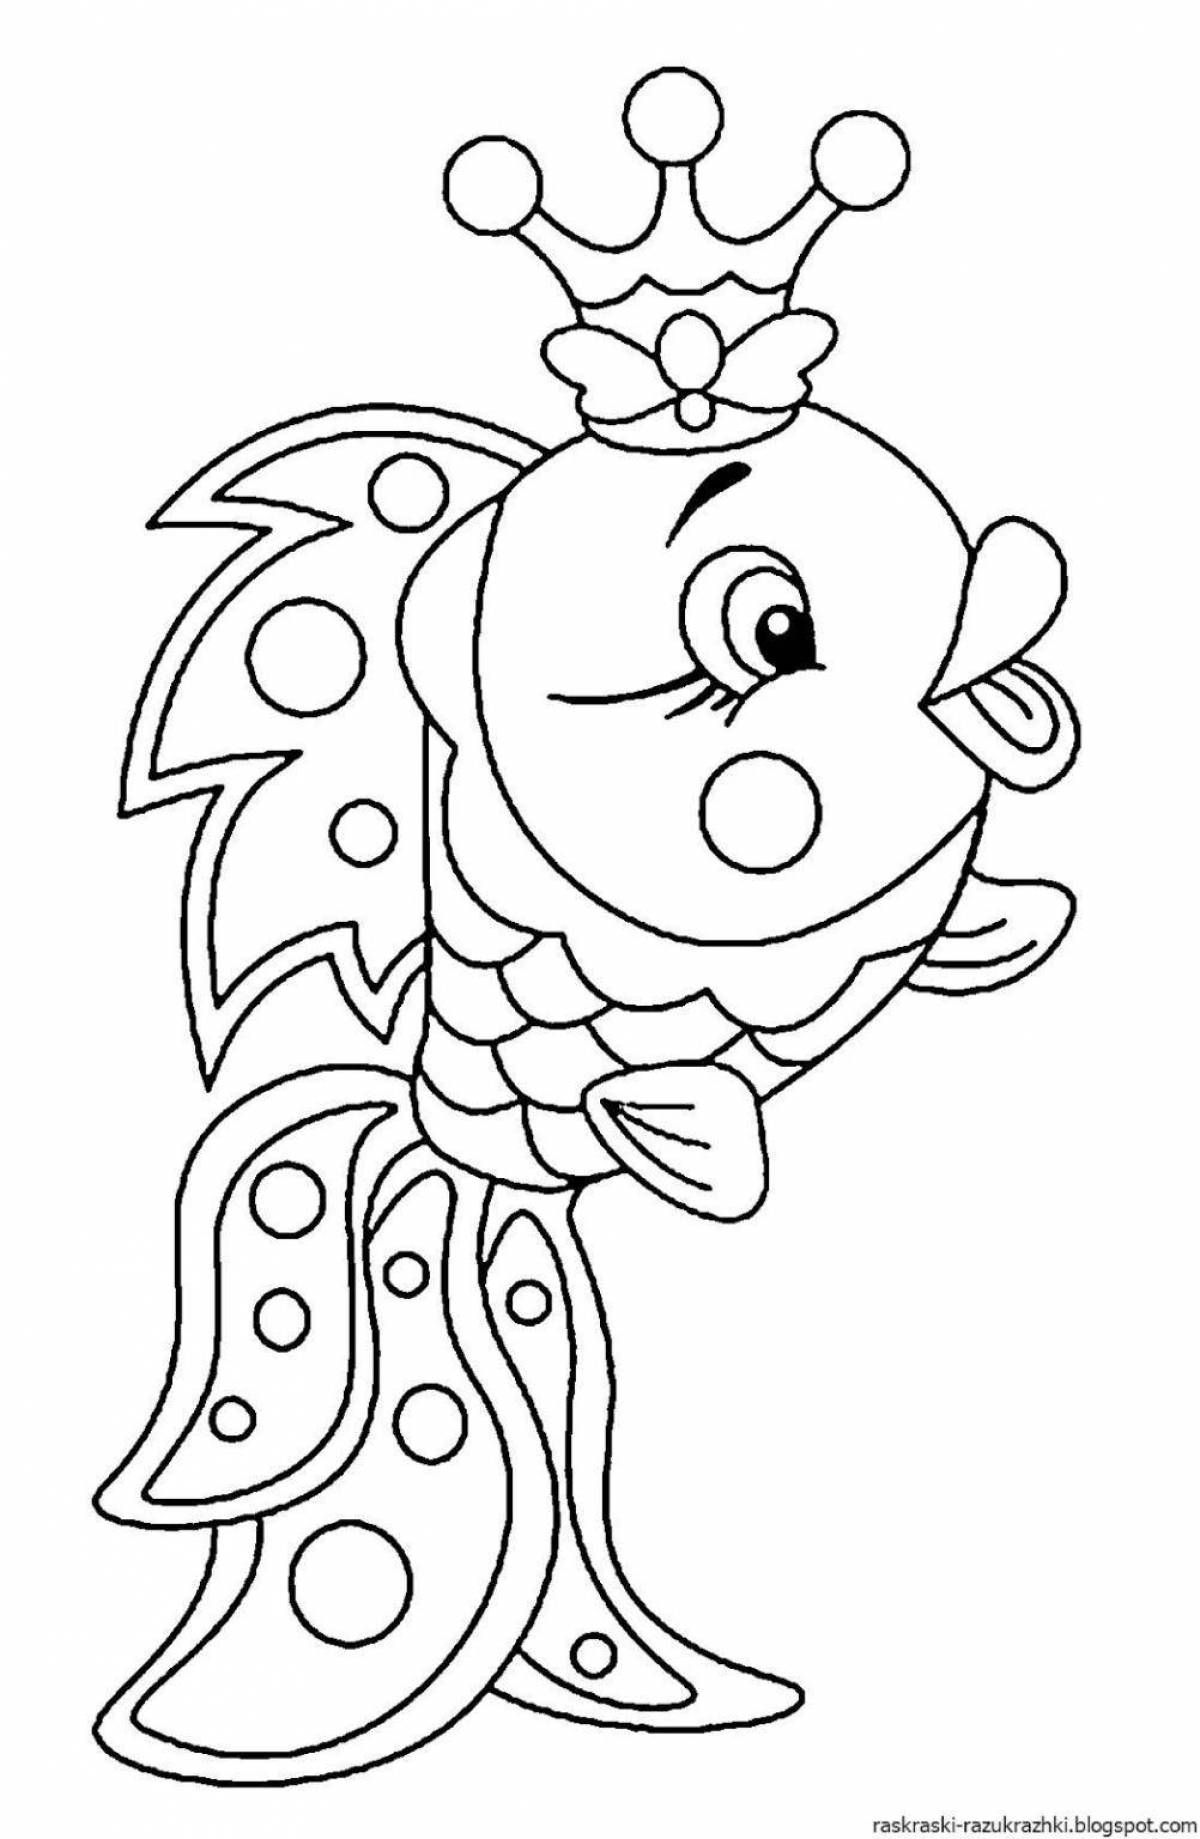 Playful goldfish coloring page for kids